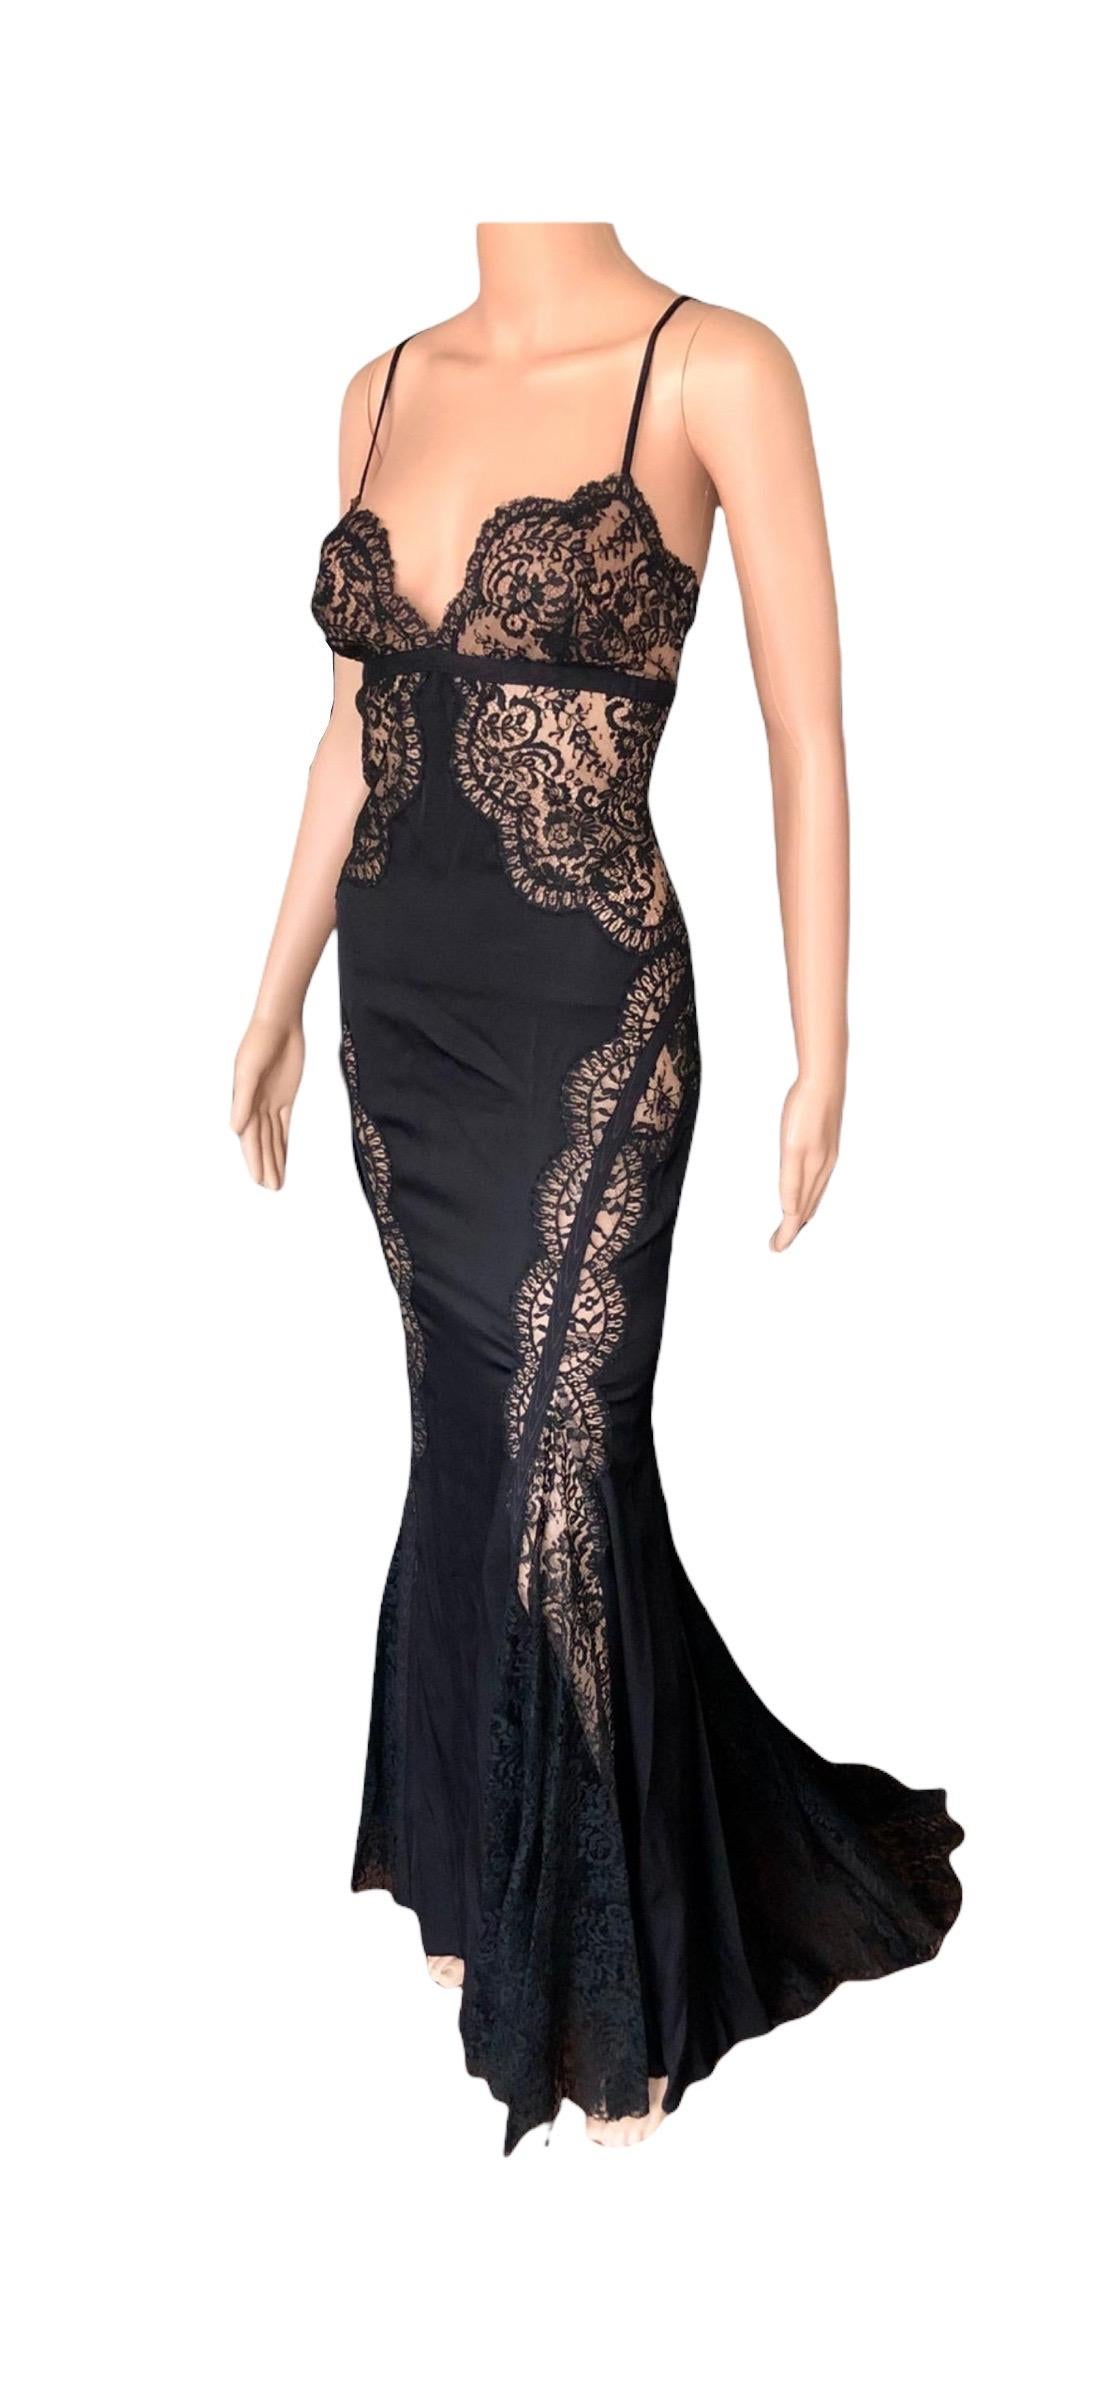 Versace Plunged Sheer Lace Panels Backless Black Evening Dress Gown  For Sale 1